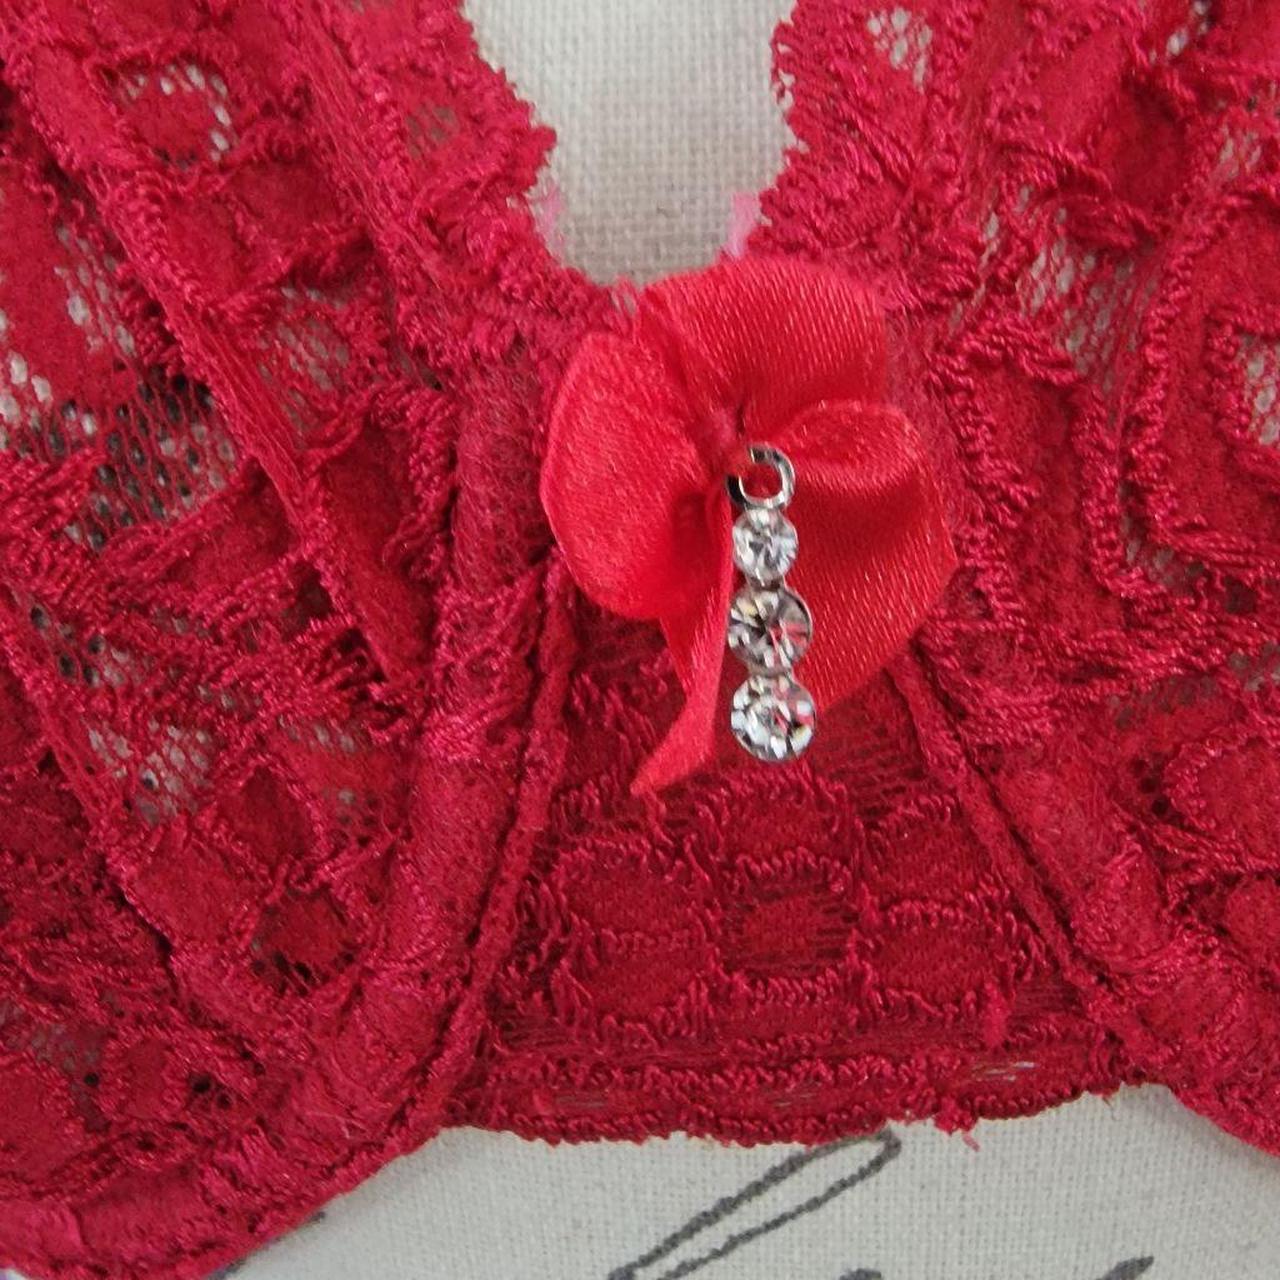 Product Image 2 - Really pretty red bra with